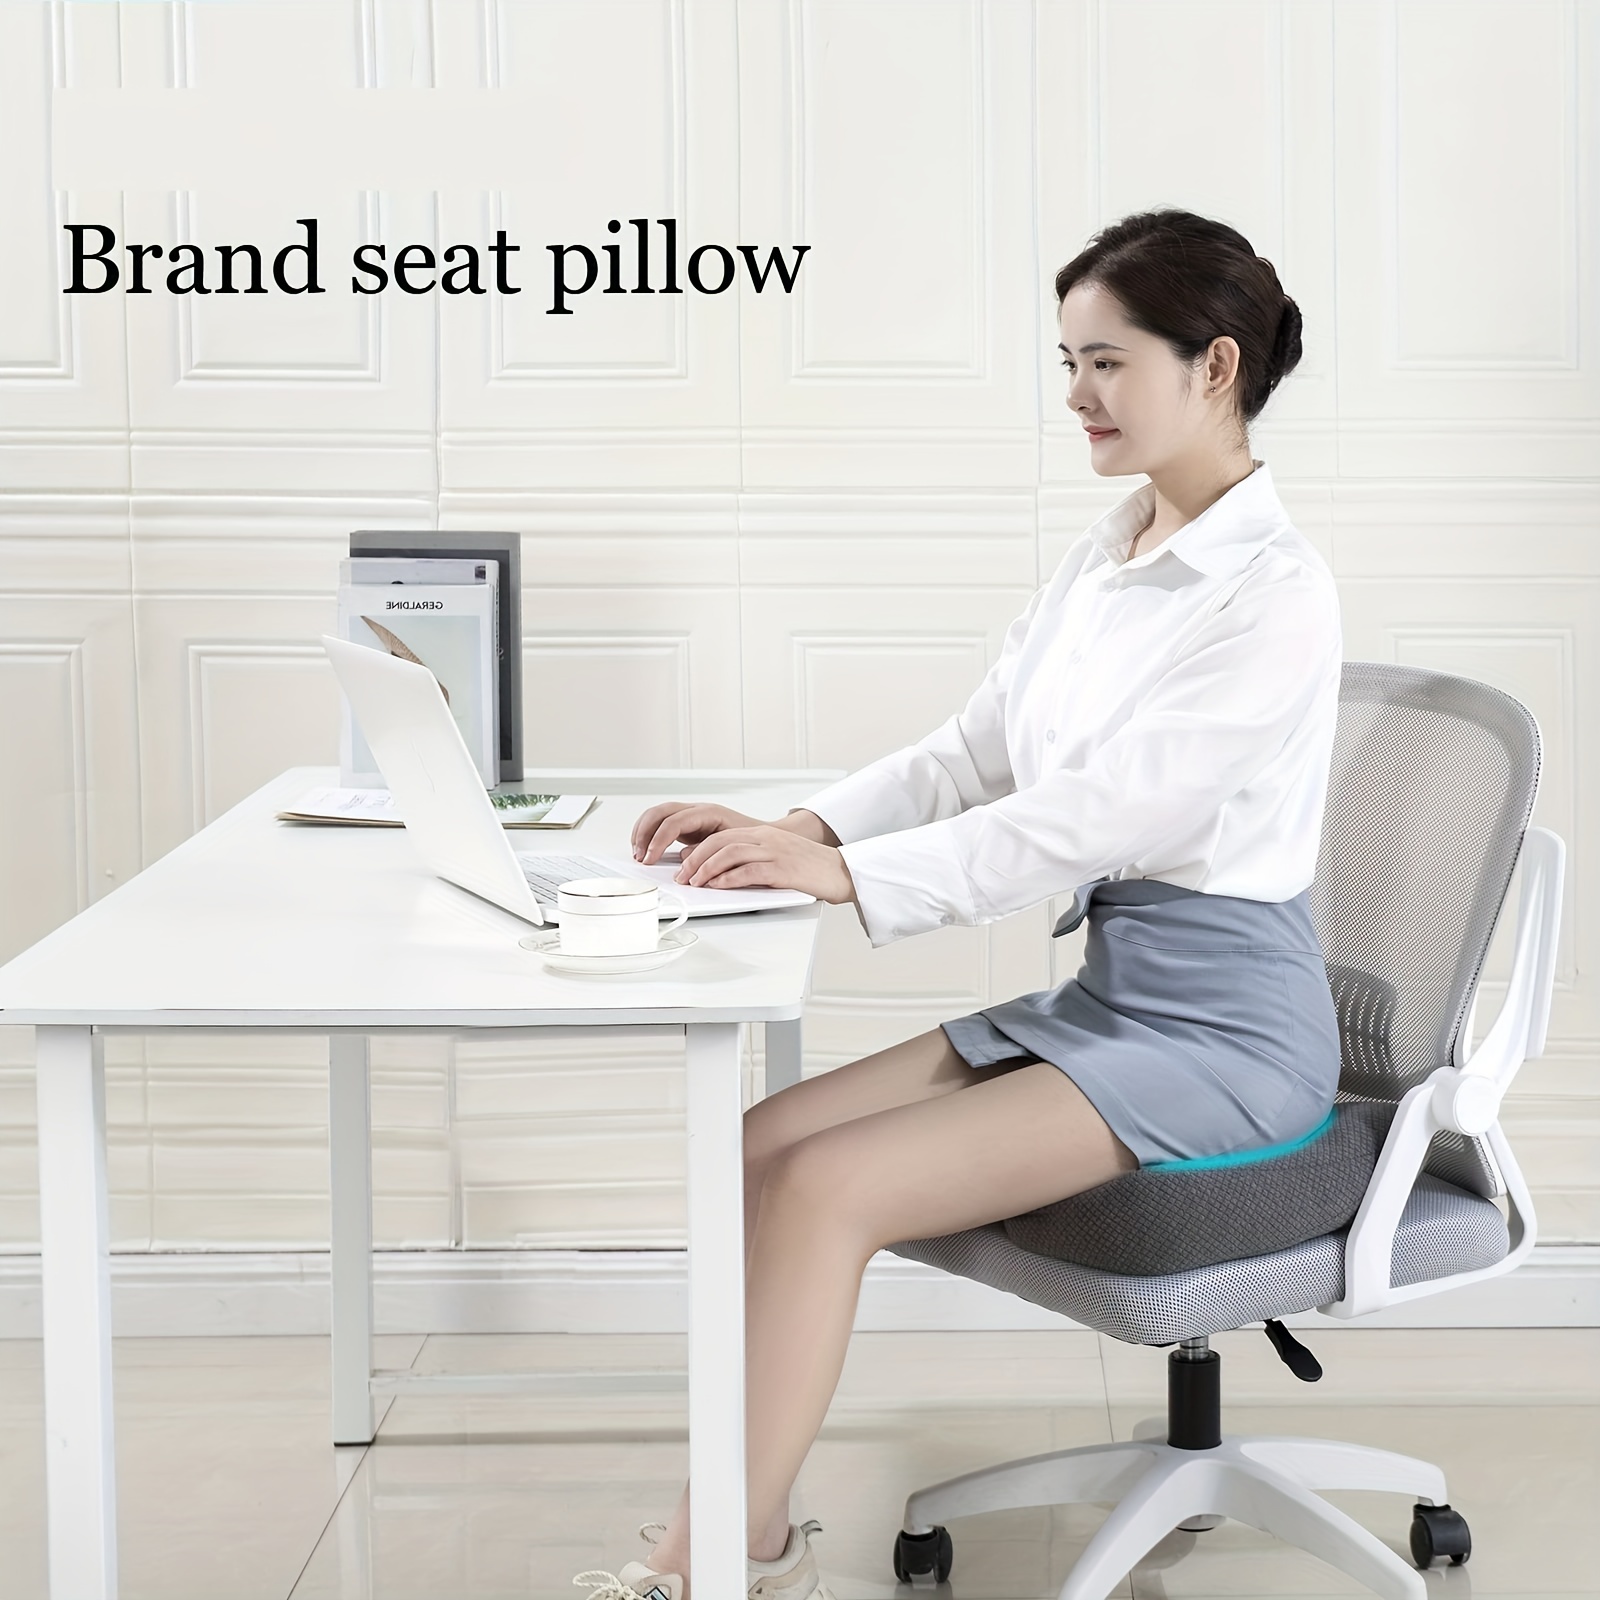 Seat Cushions For Office Chairs, Tailbone Pain Relief Cushion